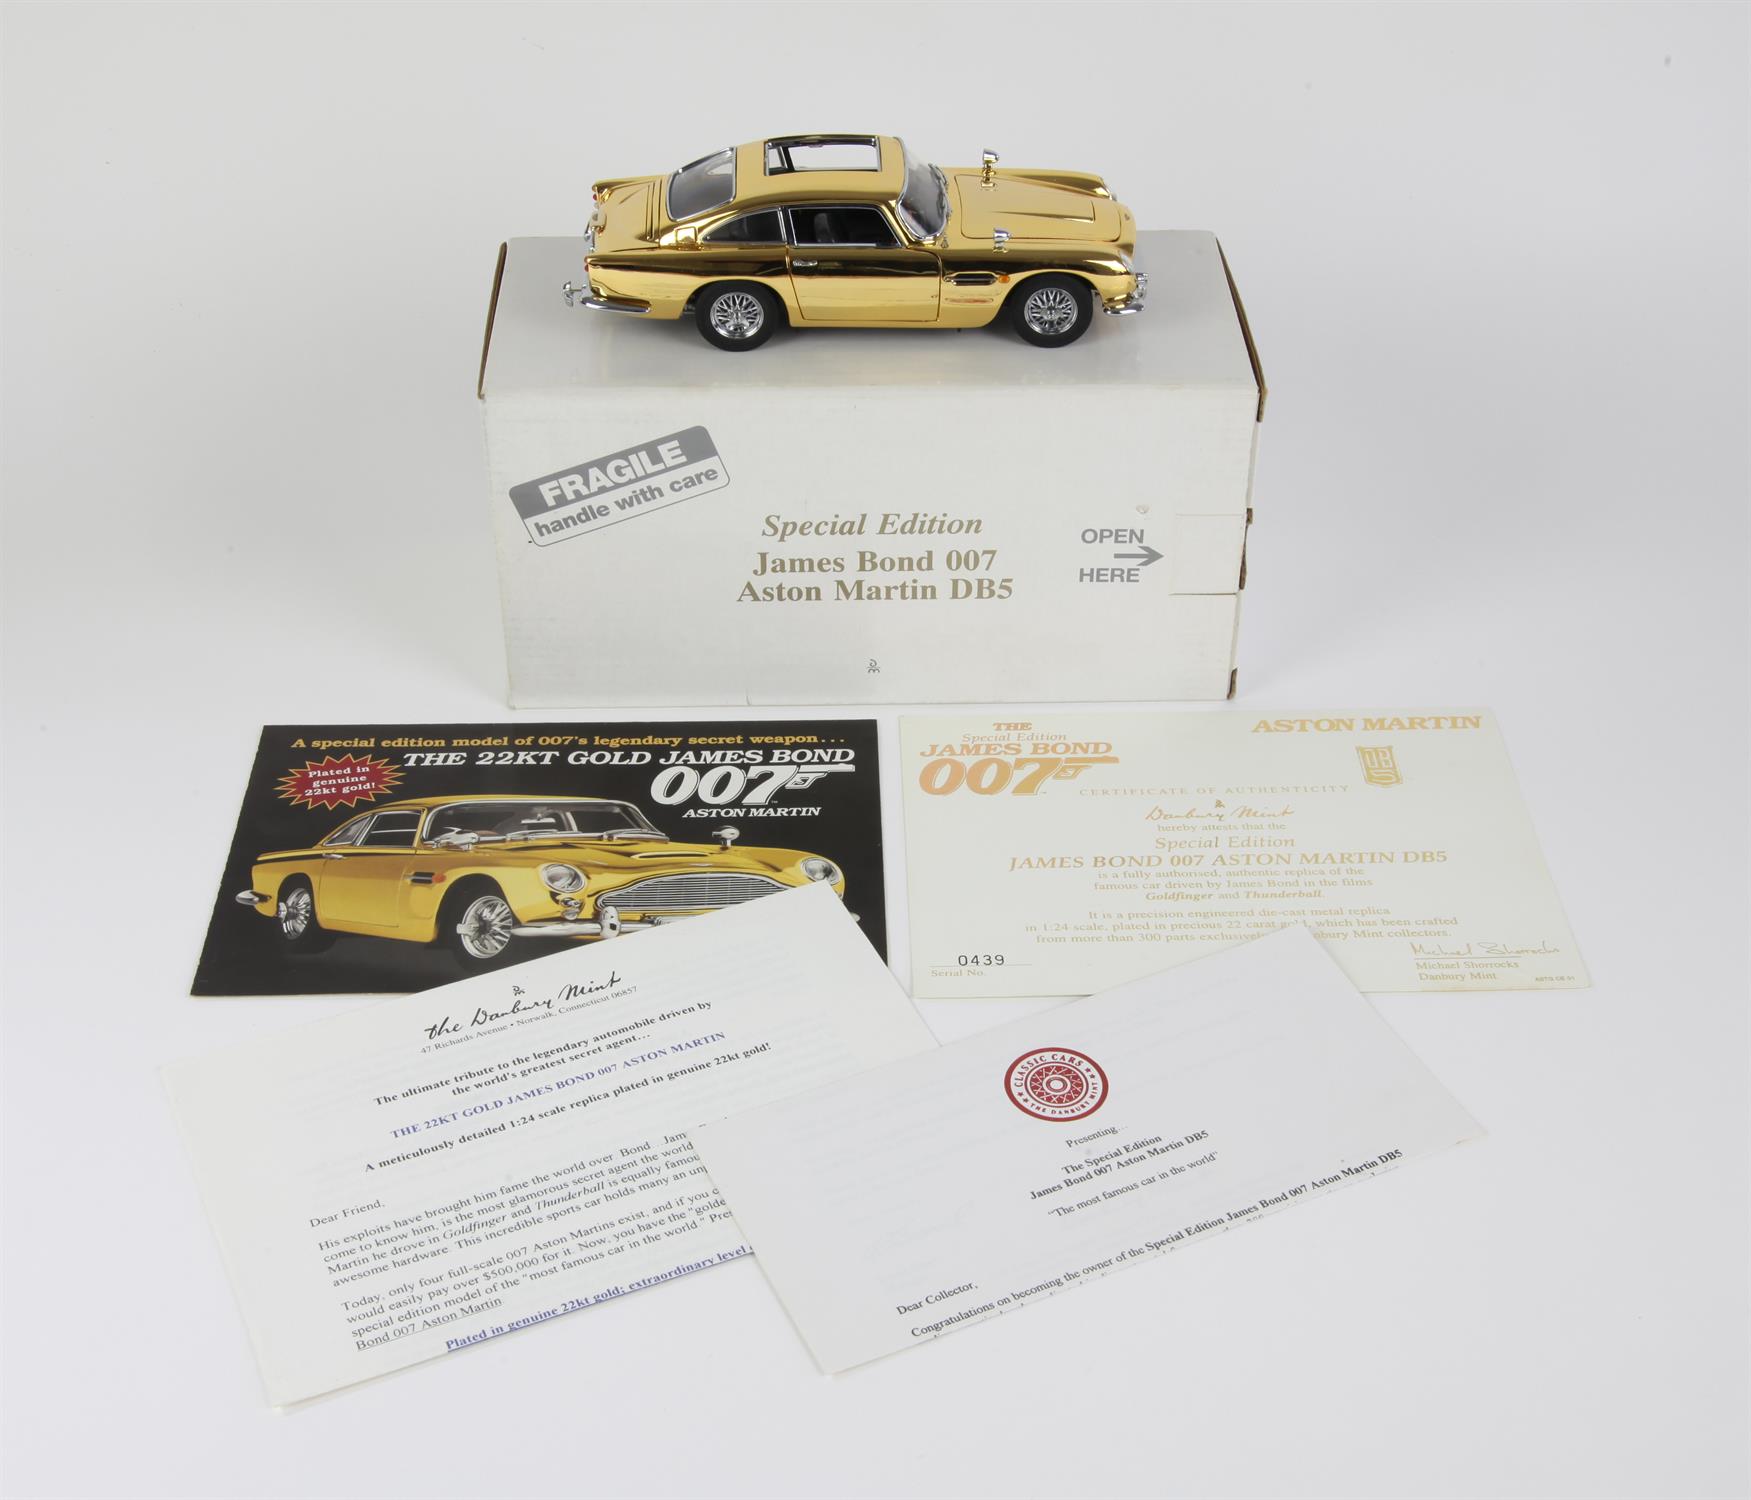 James Bond 007 - Danbury Mint Special Edition Aston Martin DB5 1:24 scale model, gold plated, - Image 2 of 4